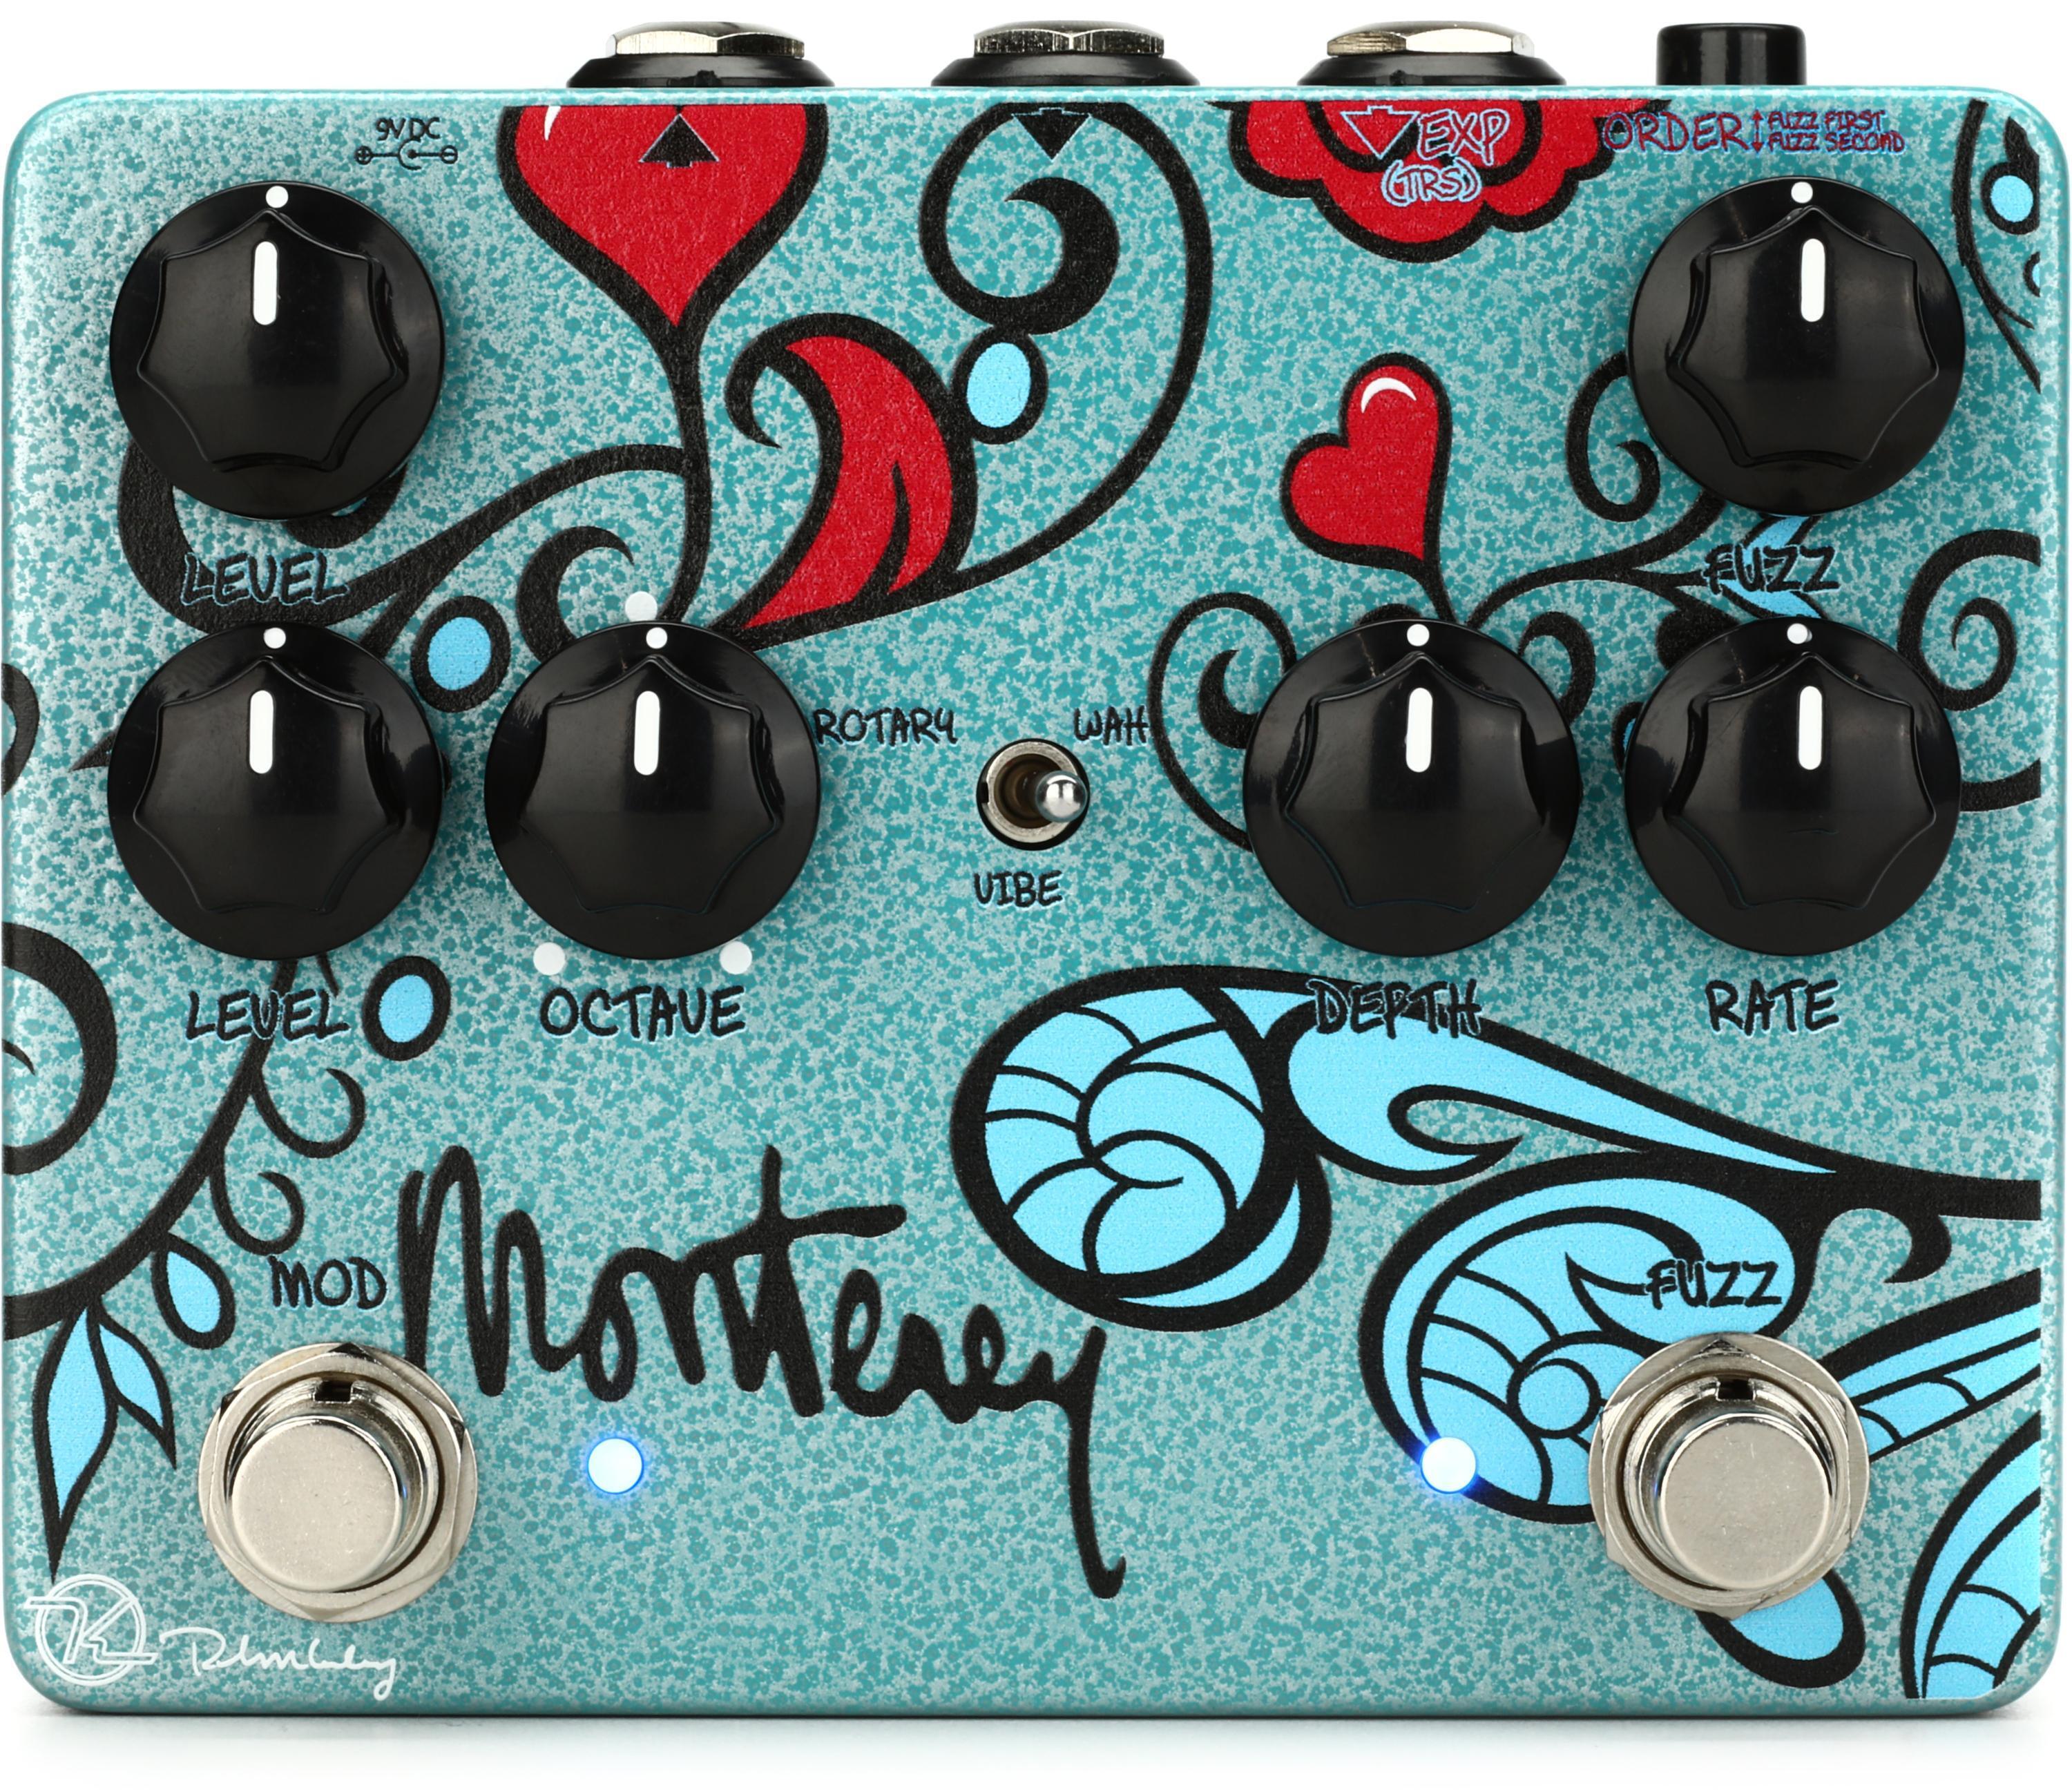 Keeley Monterey Rotary Fuzz Vibe Multi-effects Pedal | Sweetwater